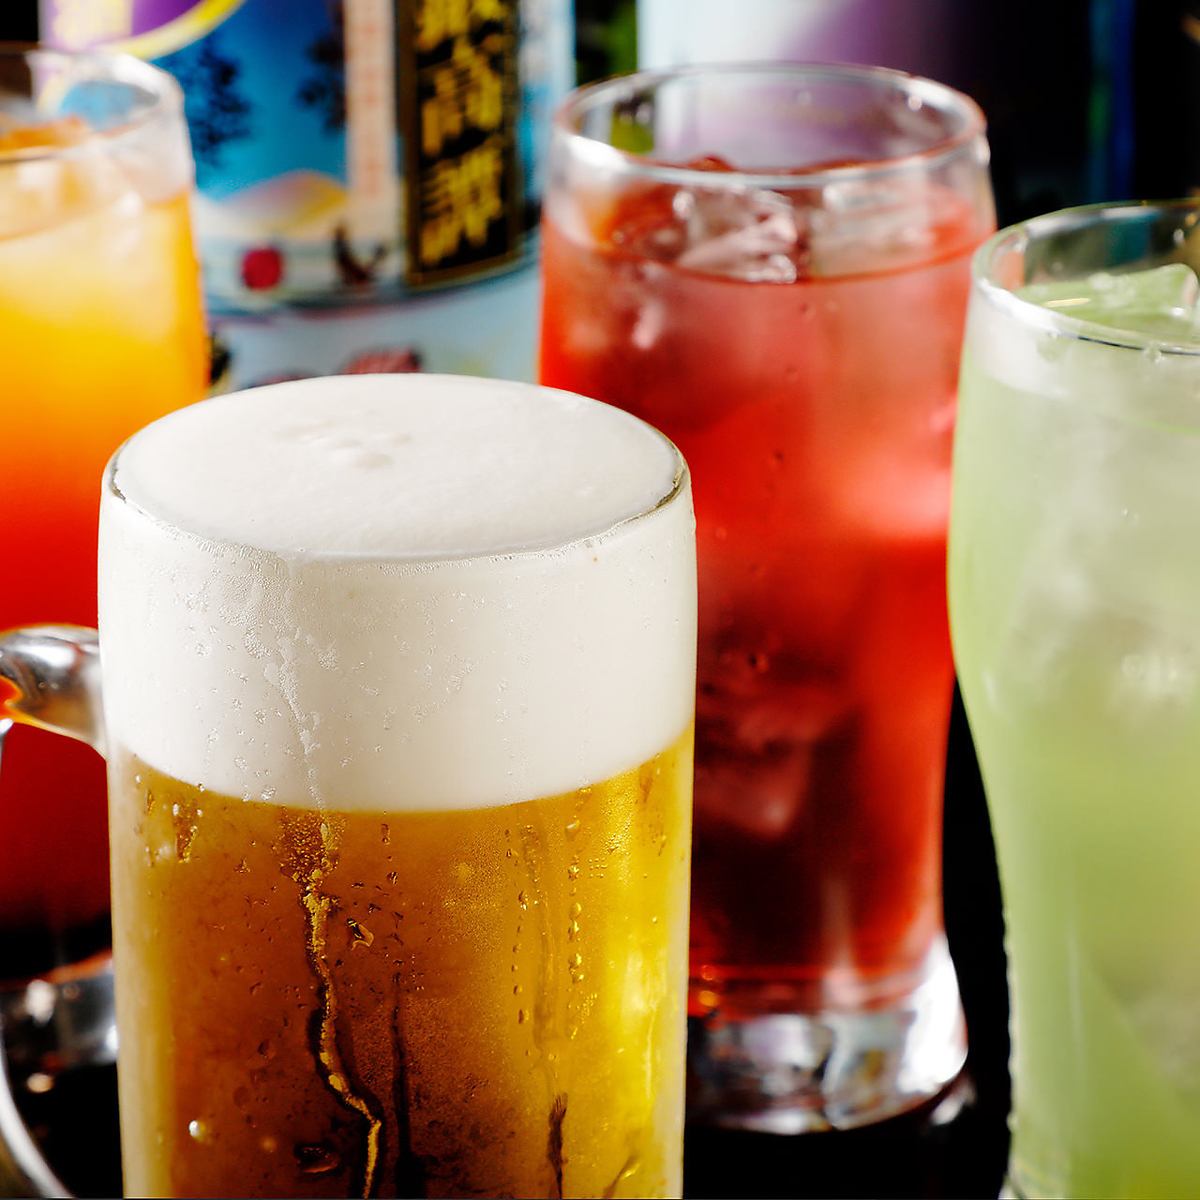 [NEW OPEN Memorial] All-you-can-drink for 2 hours from 1500 yen to 1200 yen ◎